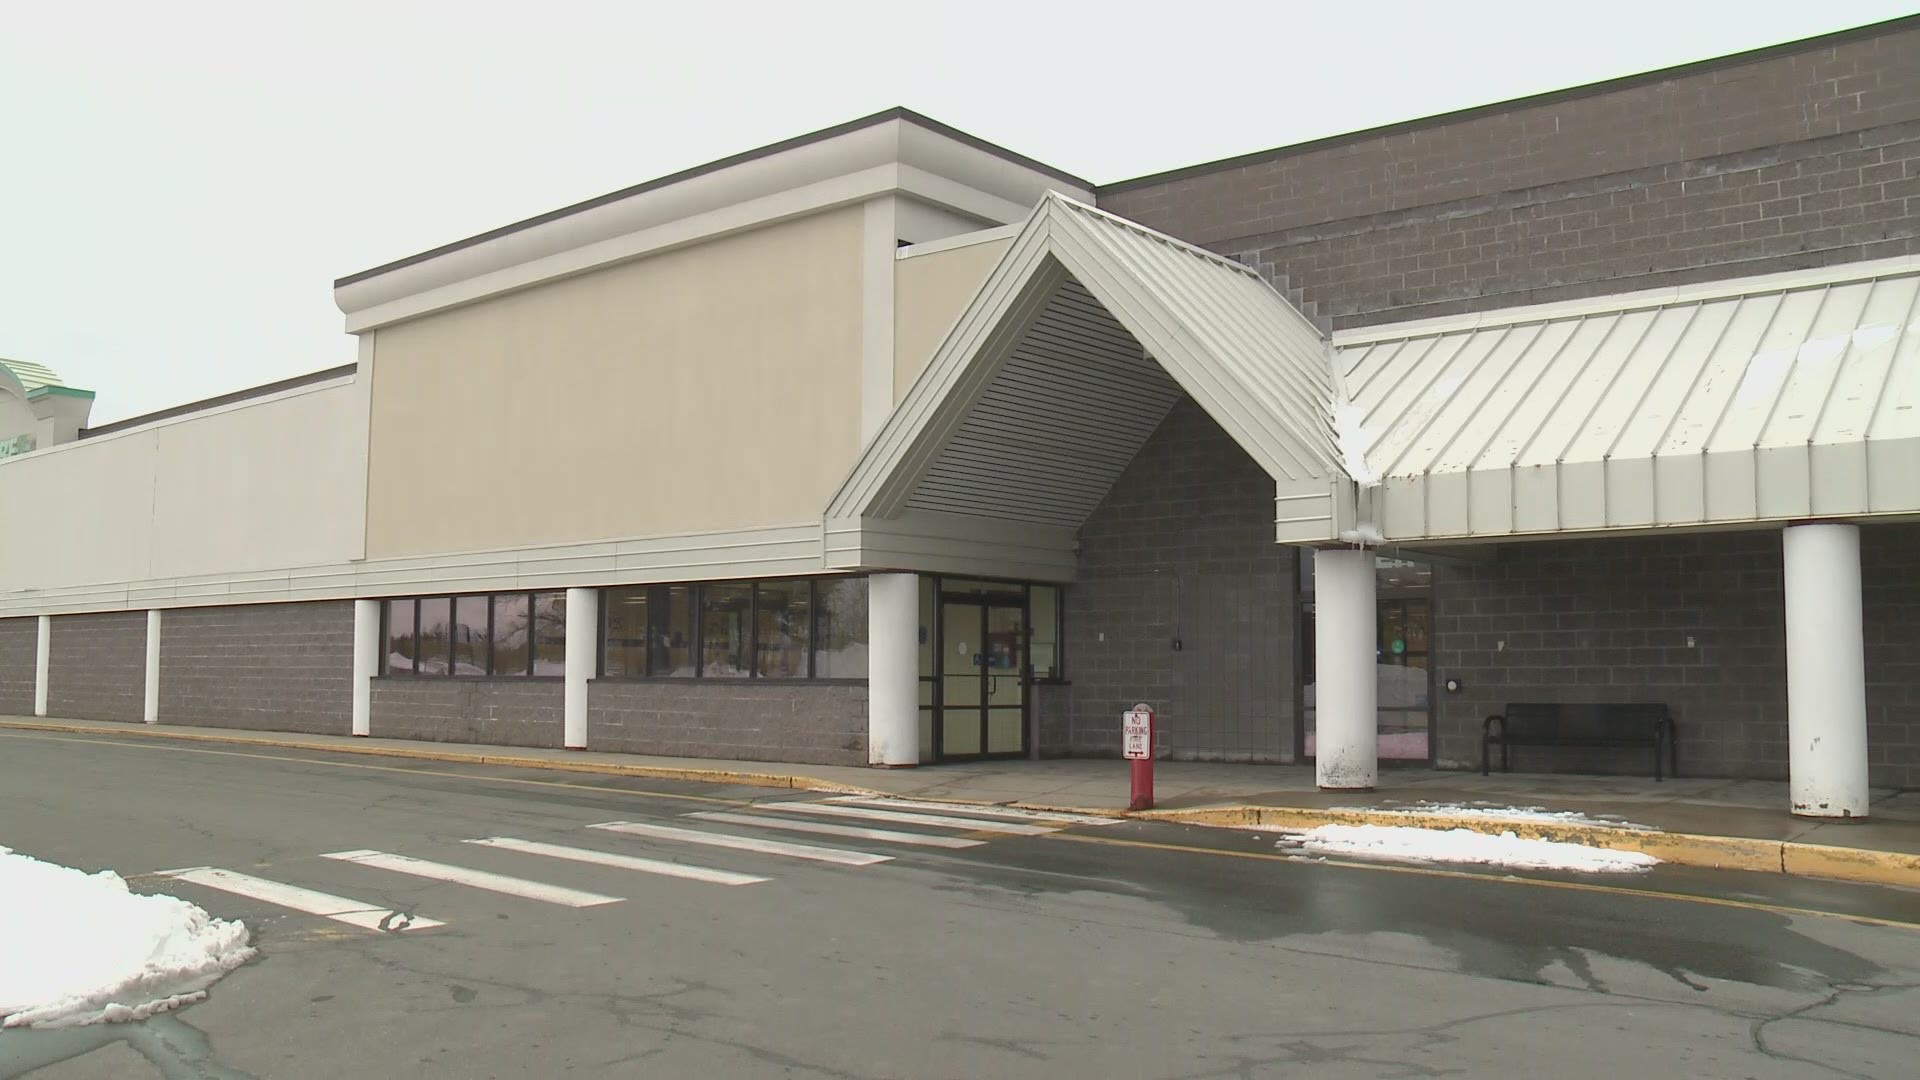 Maine's 3rd mass COVID-19 vaccination site is expected to open in Sanford in Mid-February at the closed Marshall's store, and opening more sites are being discussed